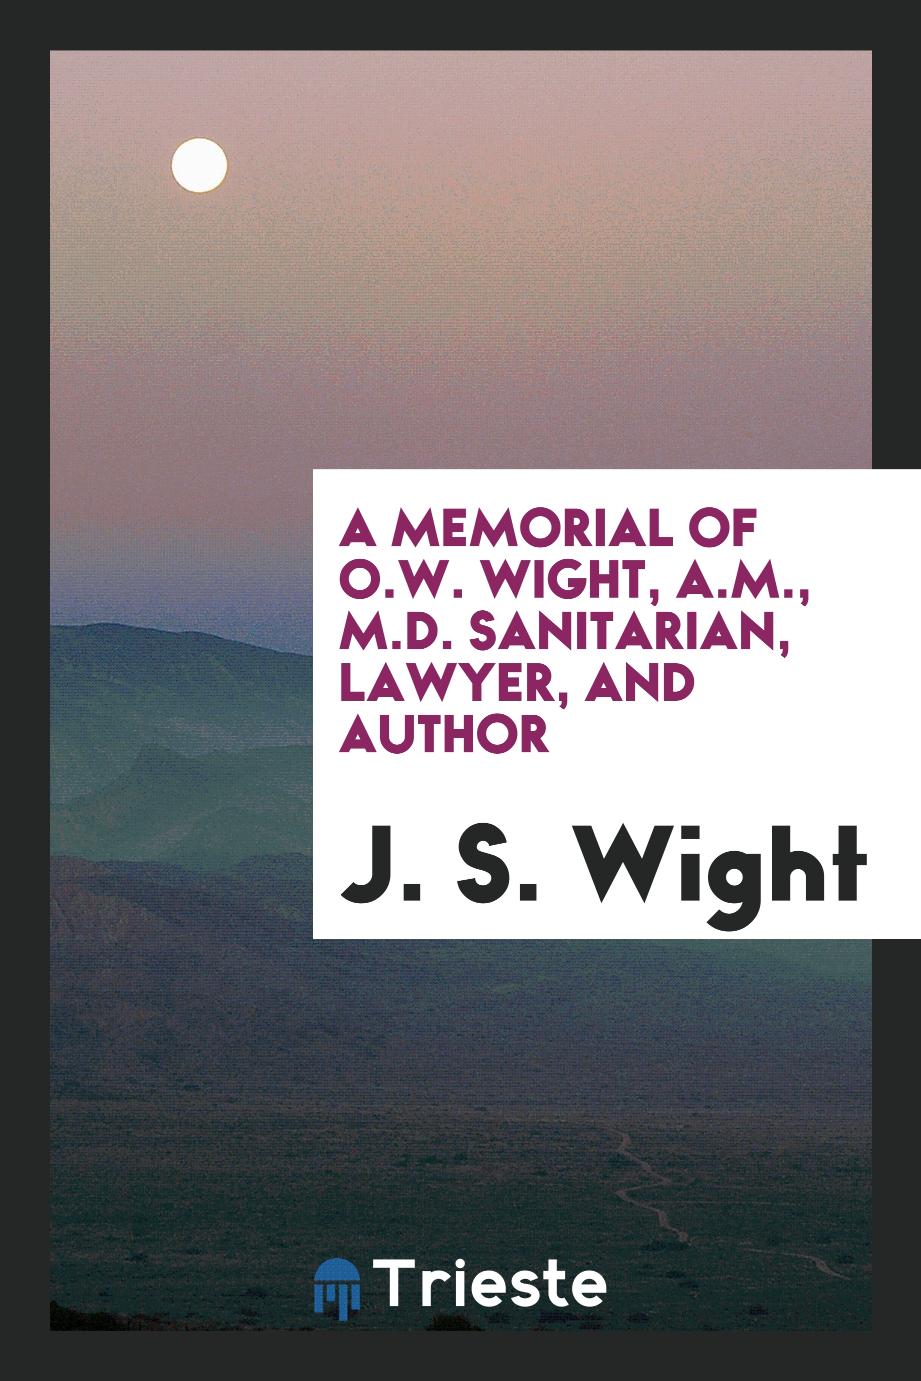 A memorial of O.W. Wight, A.M., M.D. sanitarian, lawyer, and author